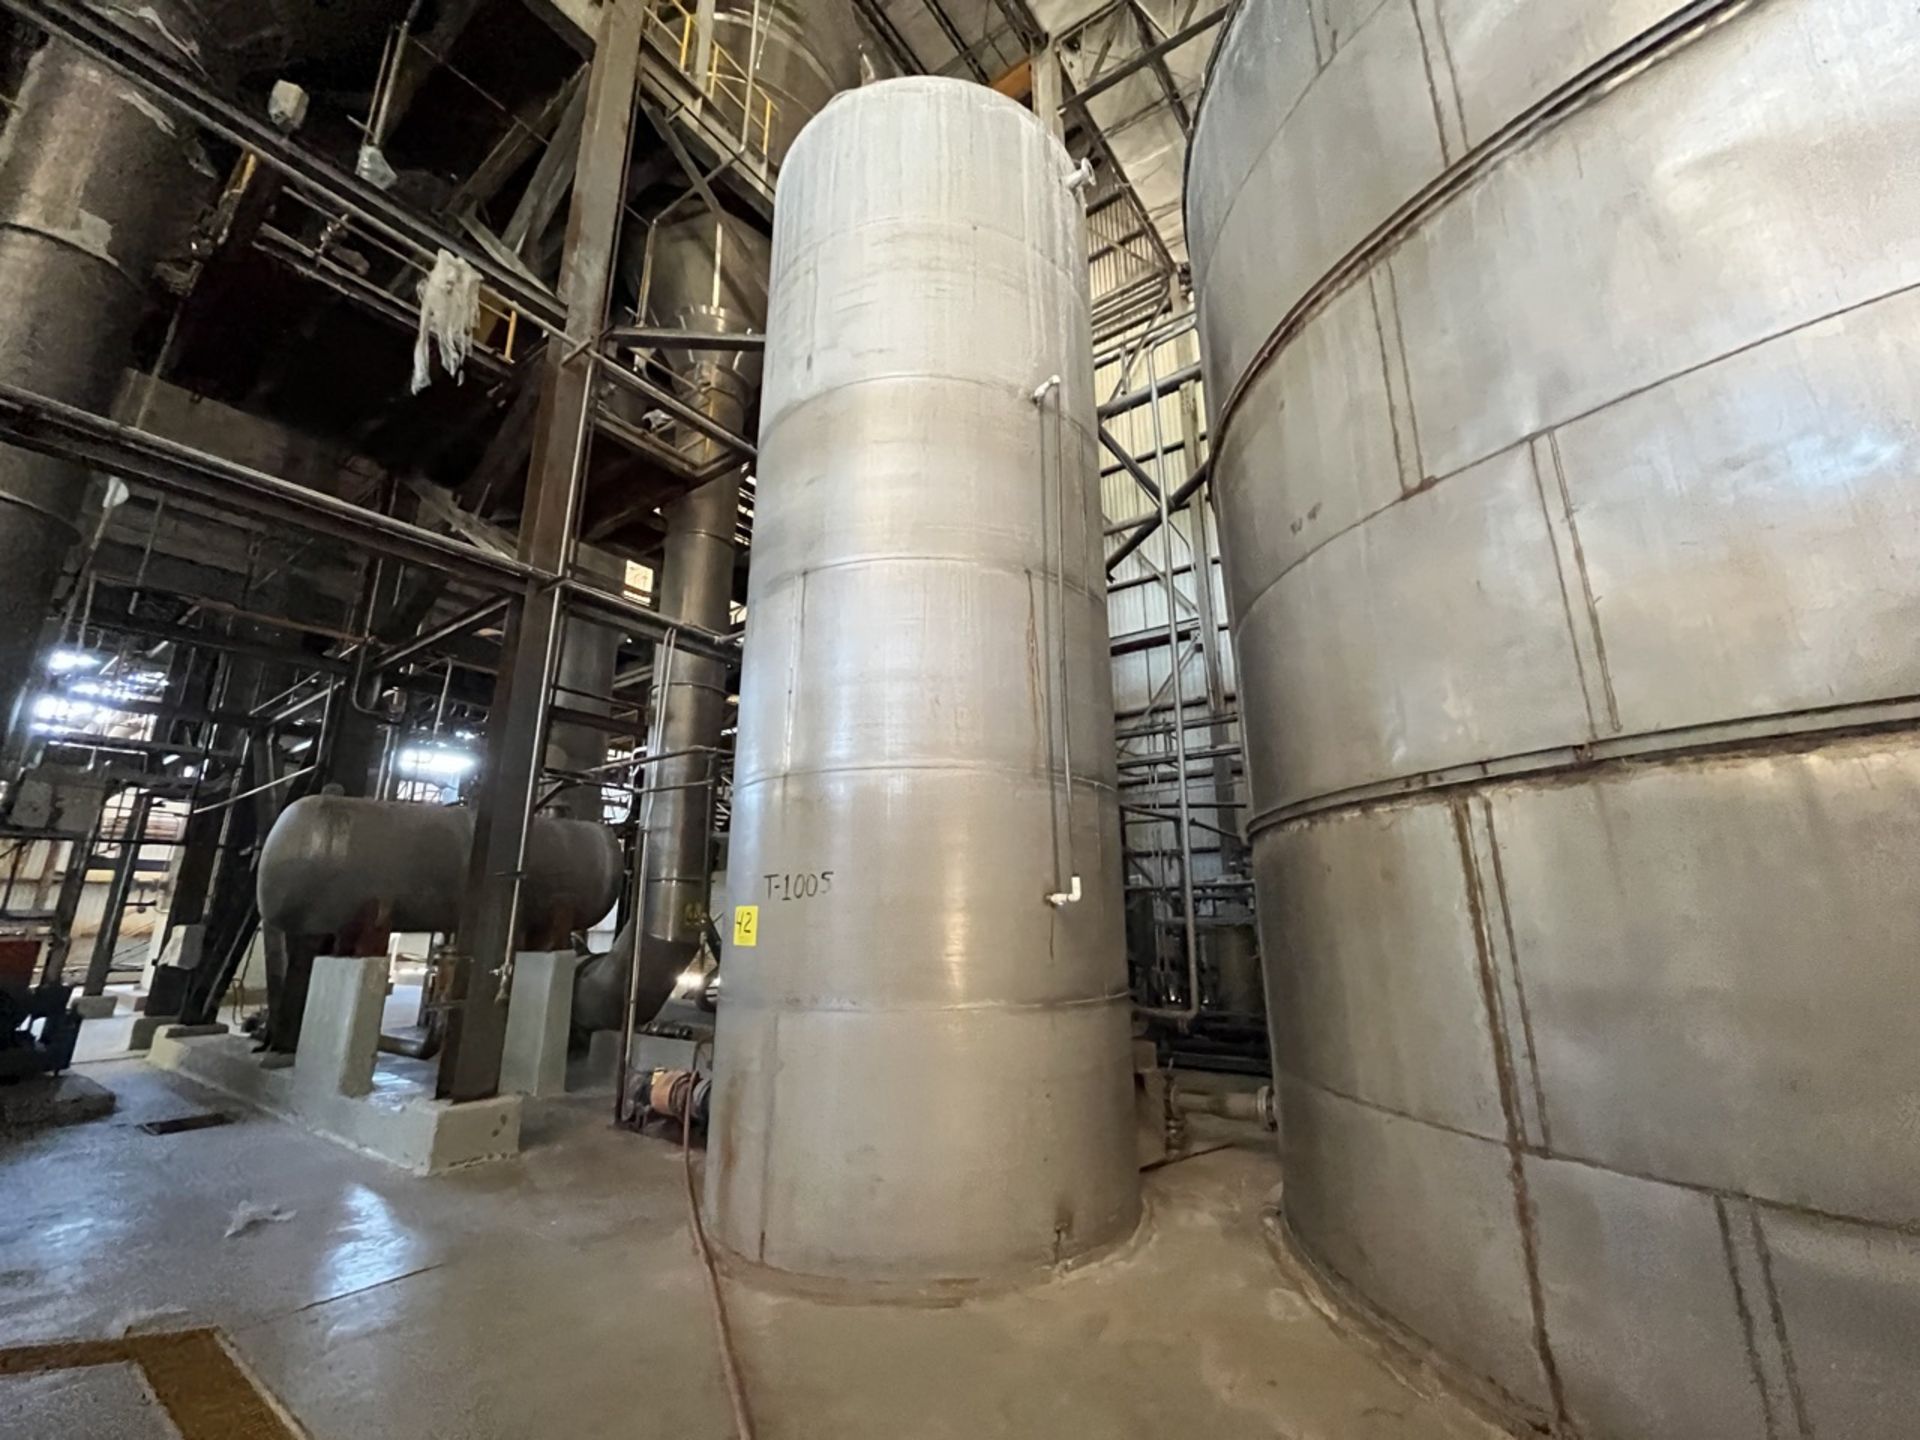 Stainless steel storage tank with a capacity of 38,000 liters, measuring approximately 2.80 meters - Bild 2 aus 9